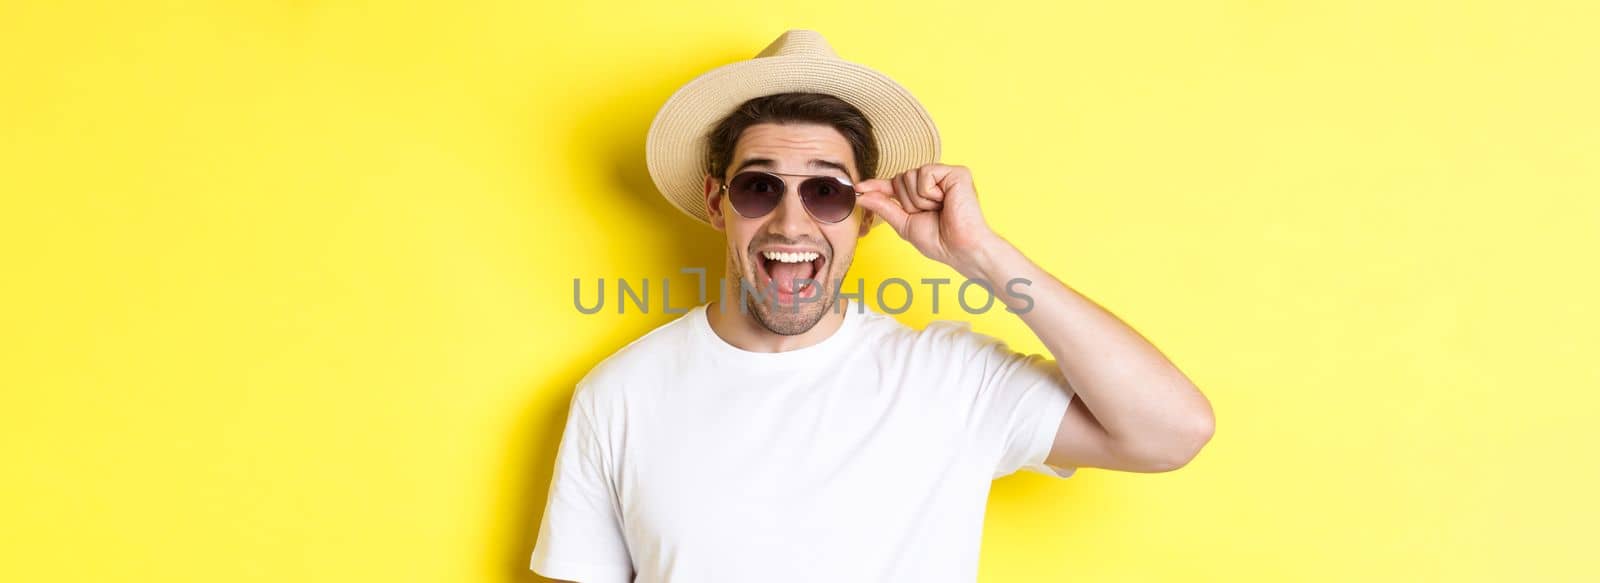 Concept of tourism and holidays. Close-up of happy man in summer hat and sunglasses enjoying vacation, standing over yellow background.